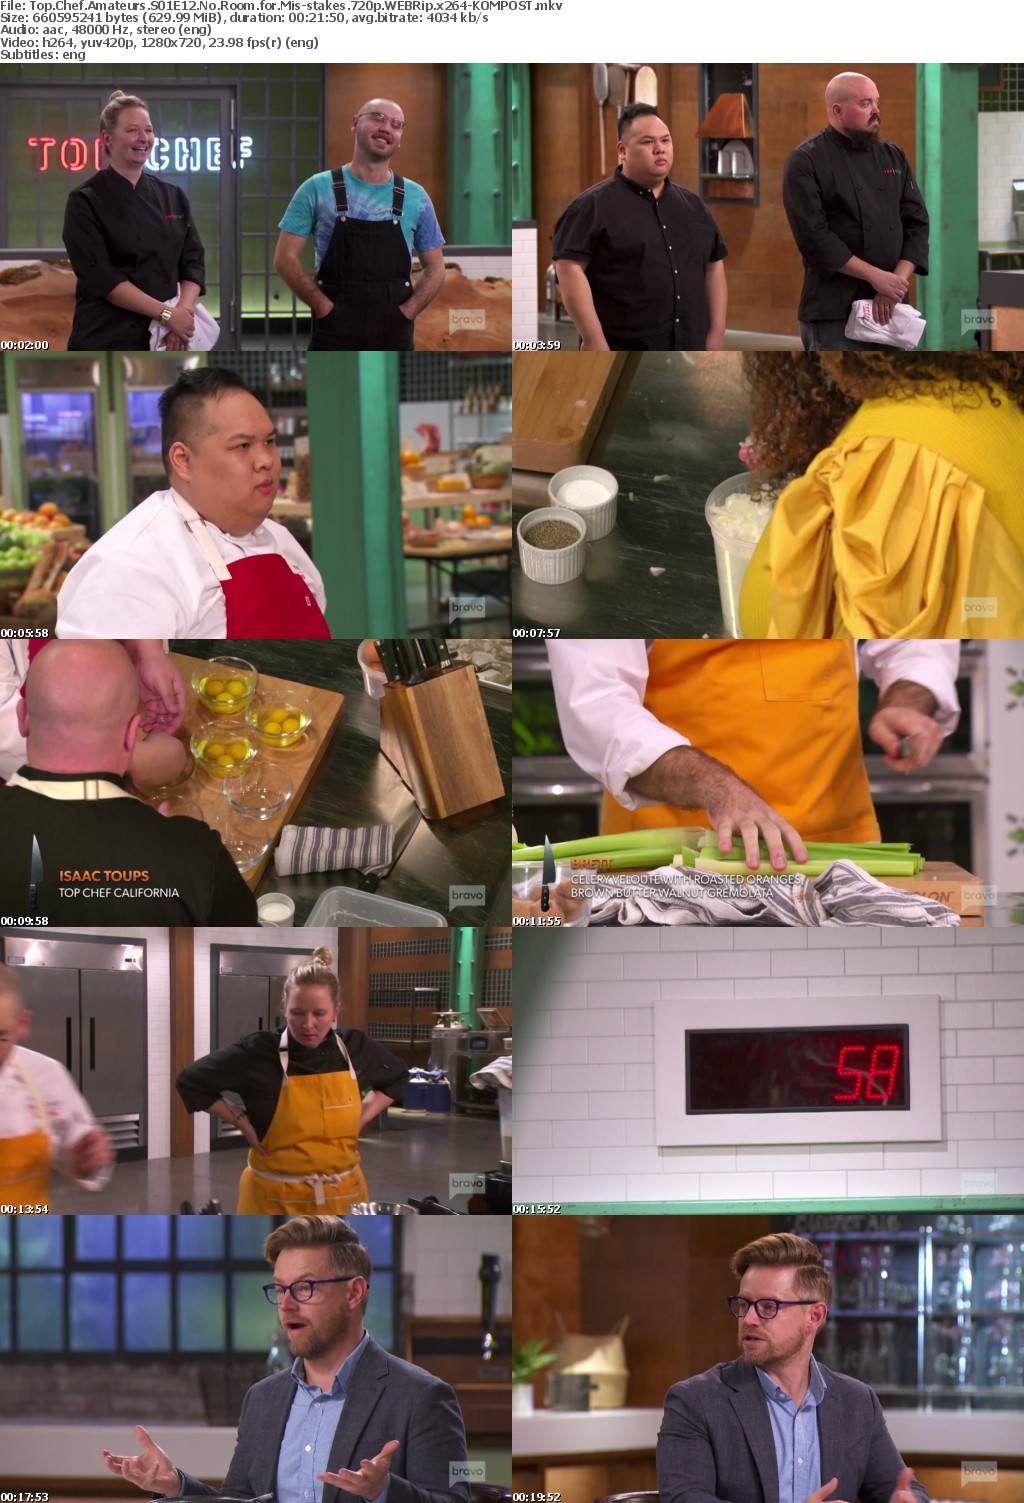 Top Chef Amateurs S01E12 No Room for Mis-stakes 720p WEBRip x264-KOMPOST